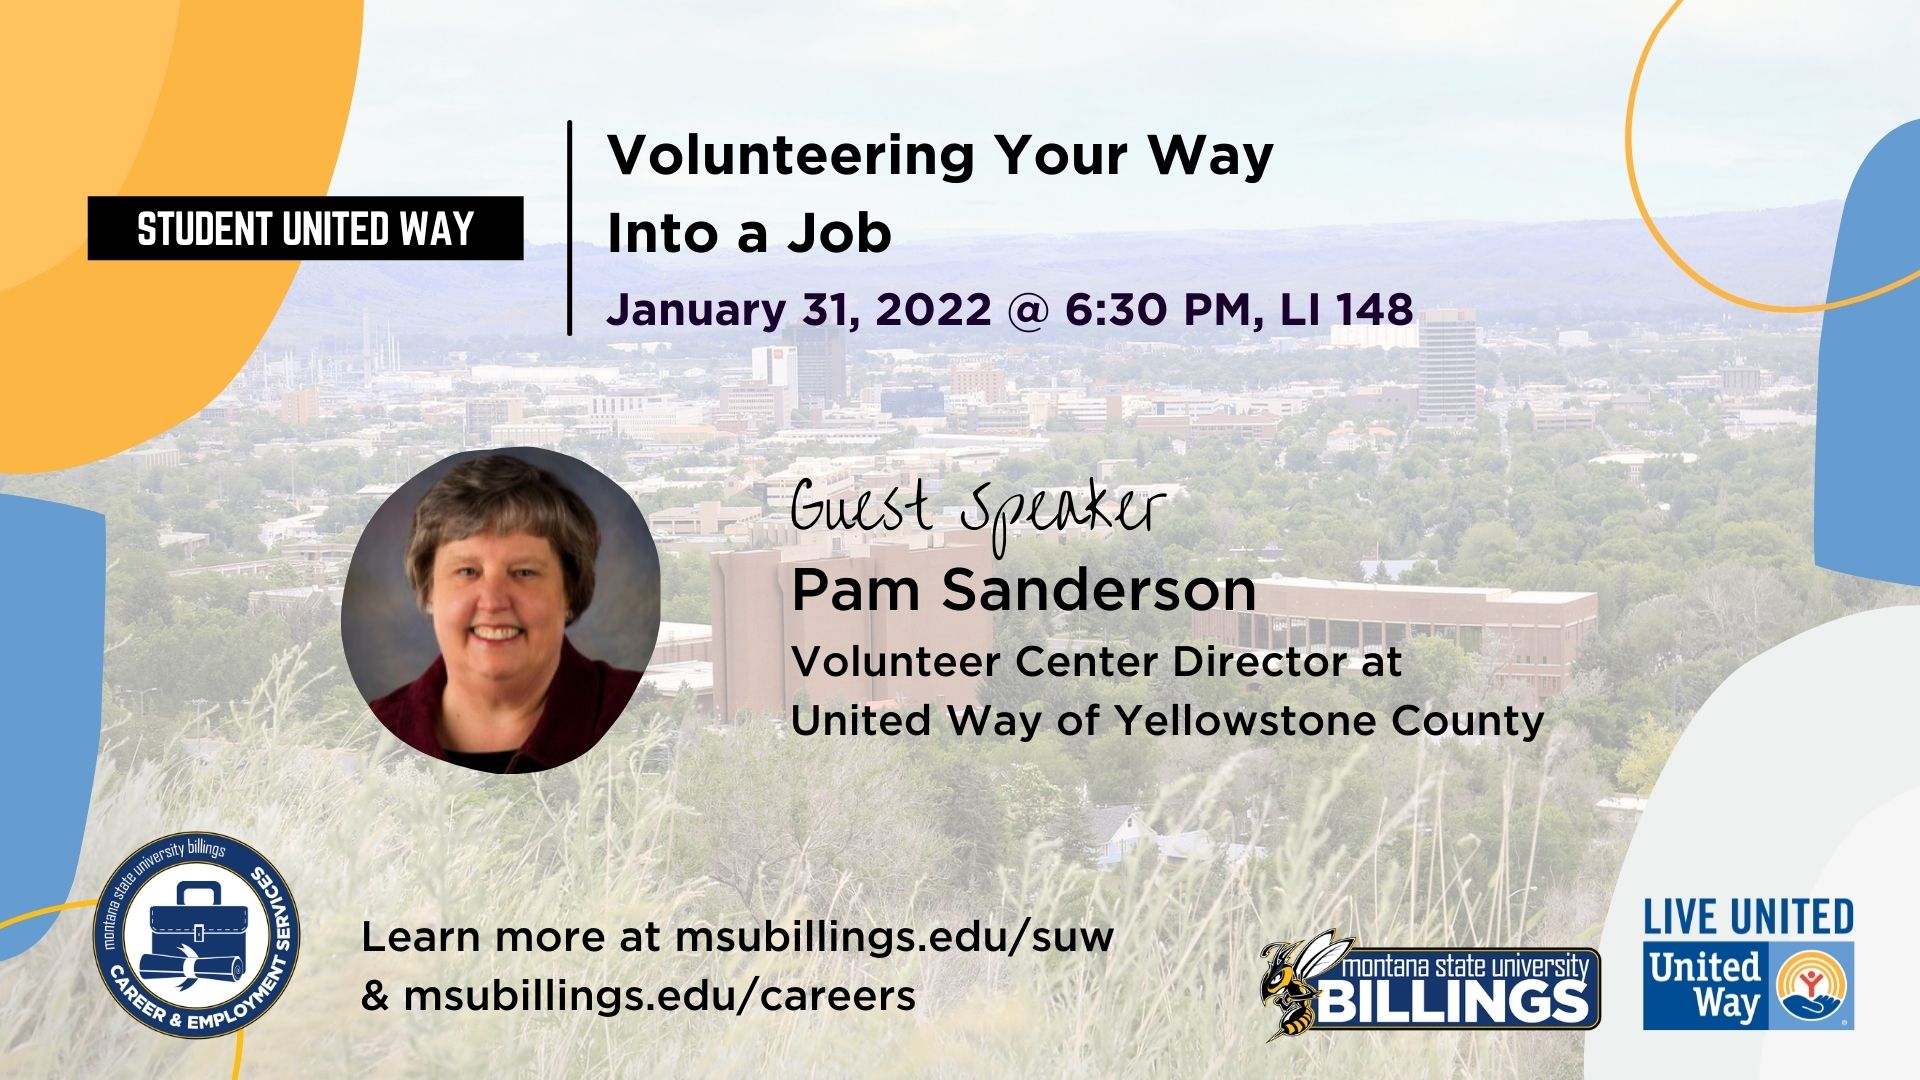 Student United Way. Volunteering Your Way Into a Job. January 31, 2022 at 6:30 PM LI 148. Guest Speaker Pam Sanderson Volunteer Center Director at United Way of Yellowstone County.